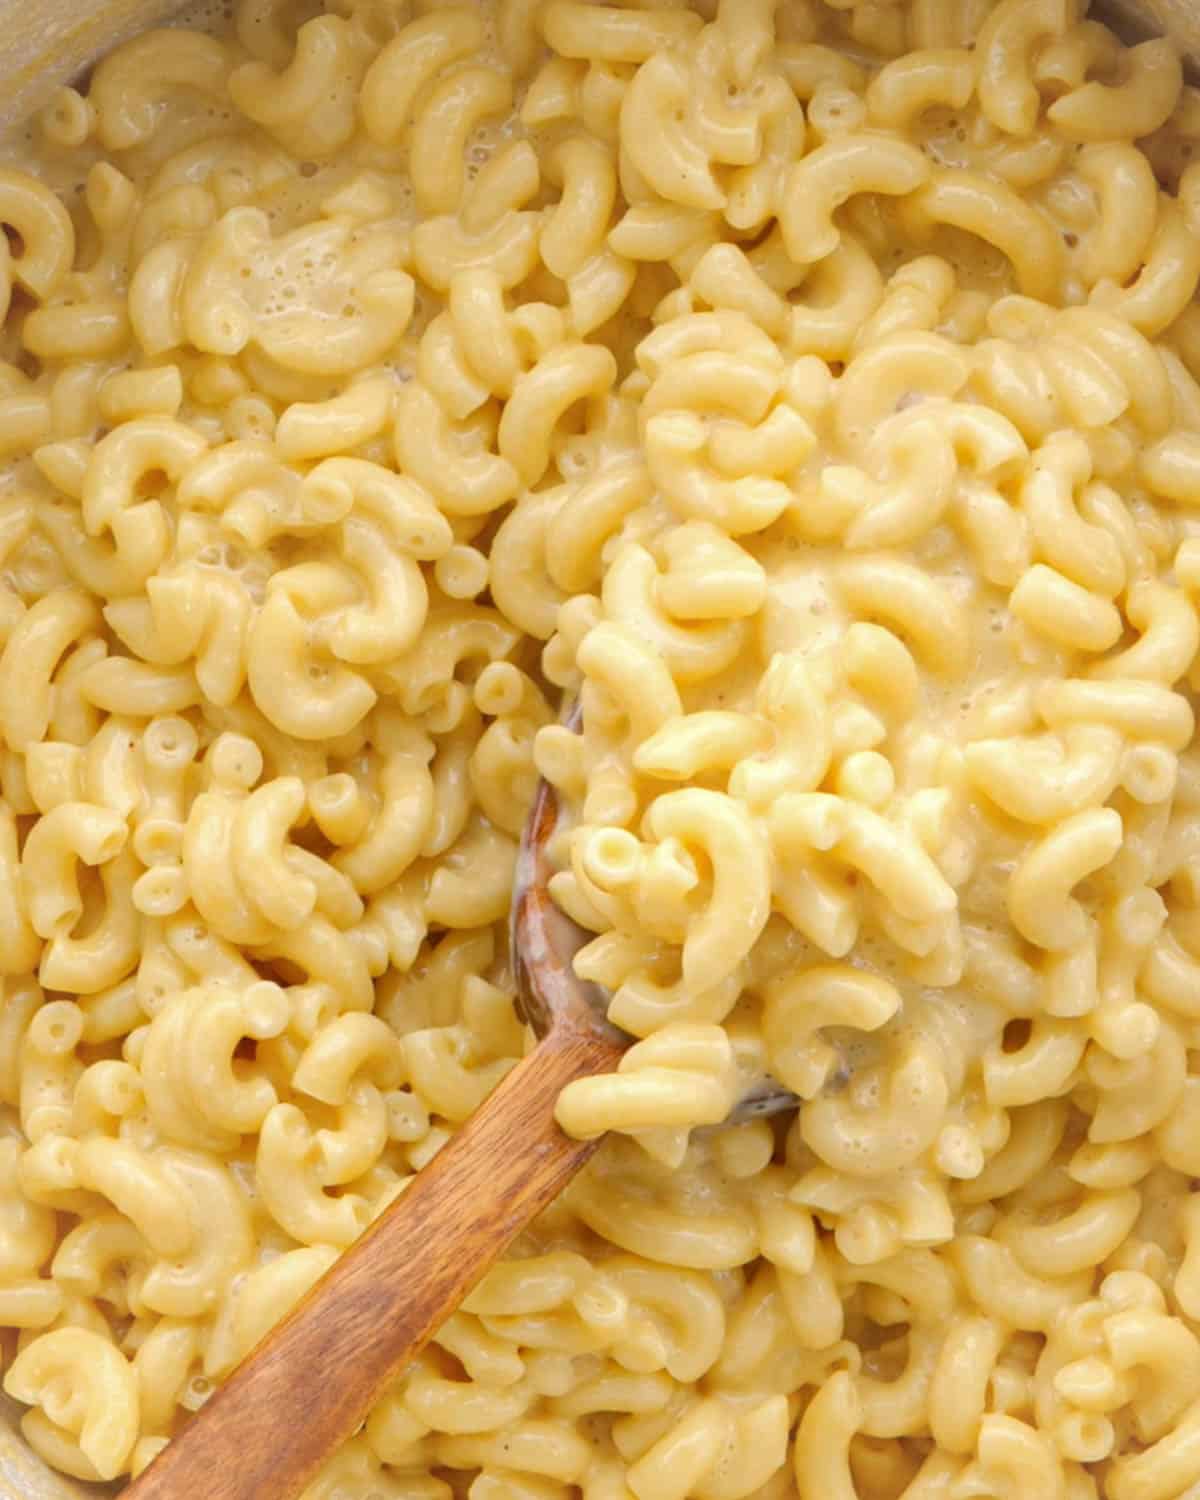 Close up of macaroni with extra creamy cheese sauce being scooped up with a large wooden spoon.